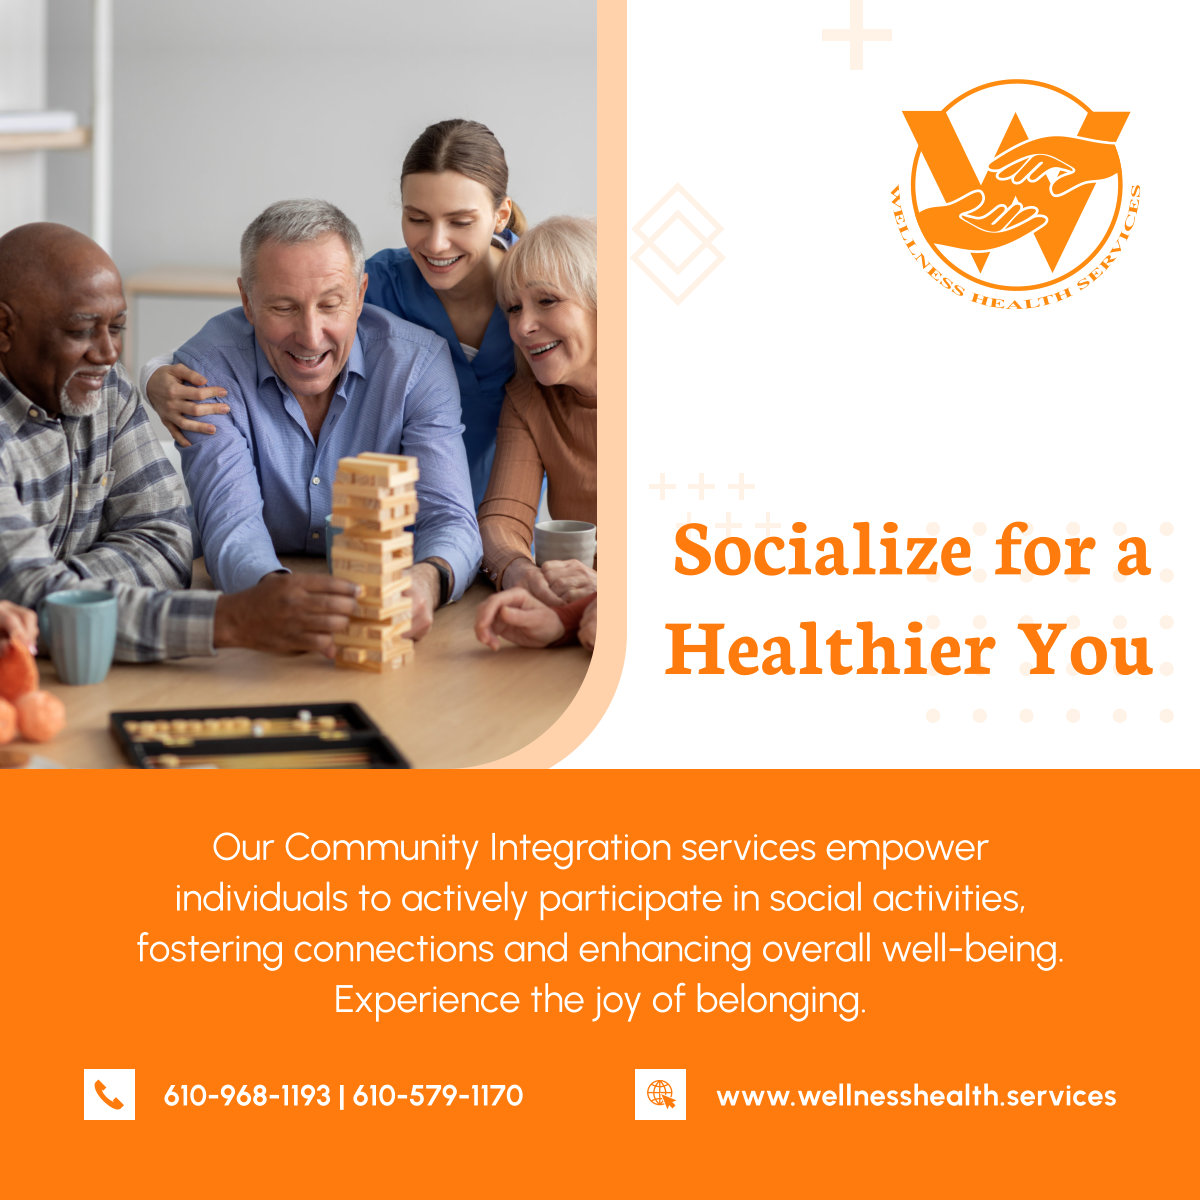 Discover the benefits of Community Integration service with Wellness Health Services. Contact us to enrich your loved one's life. 

#DrexelHillPA #HomeCare #CommunityIntegration #SocialConnection #WellnessEnhancement